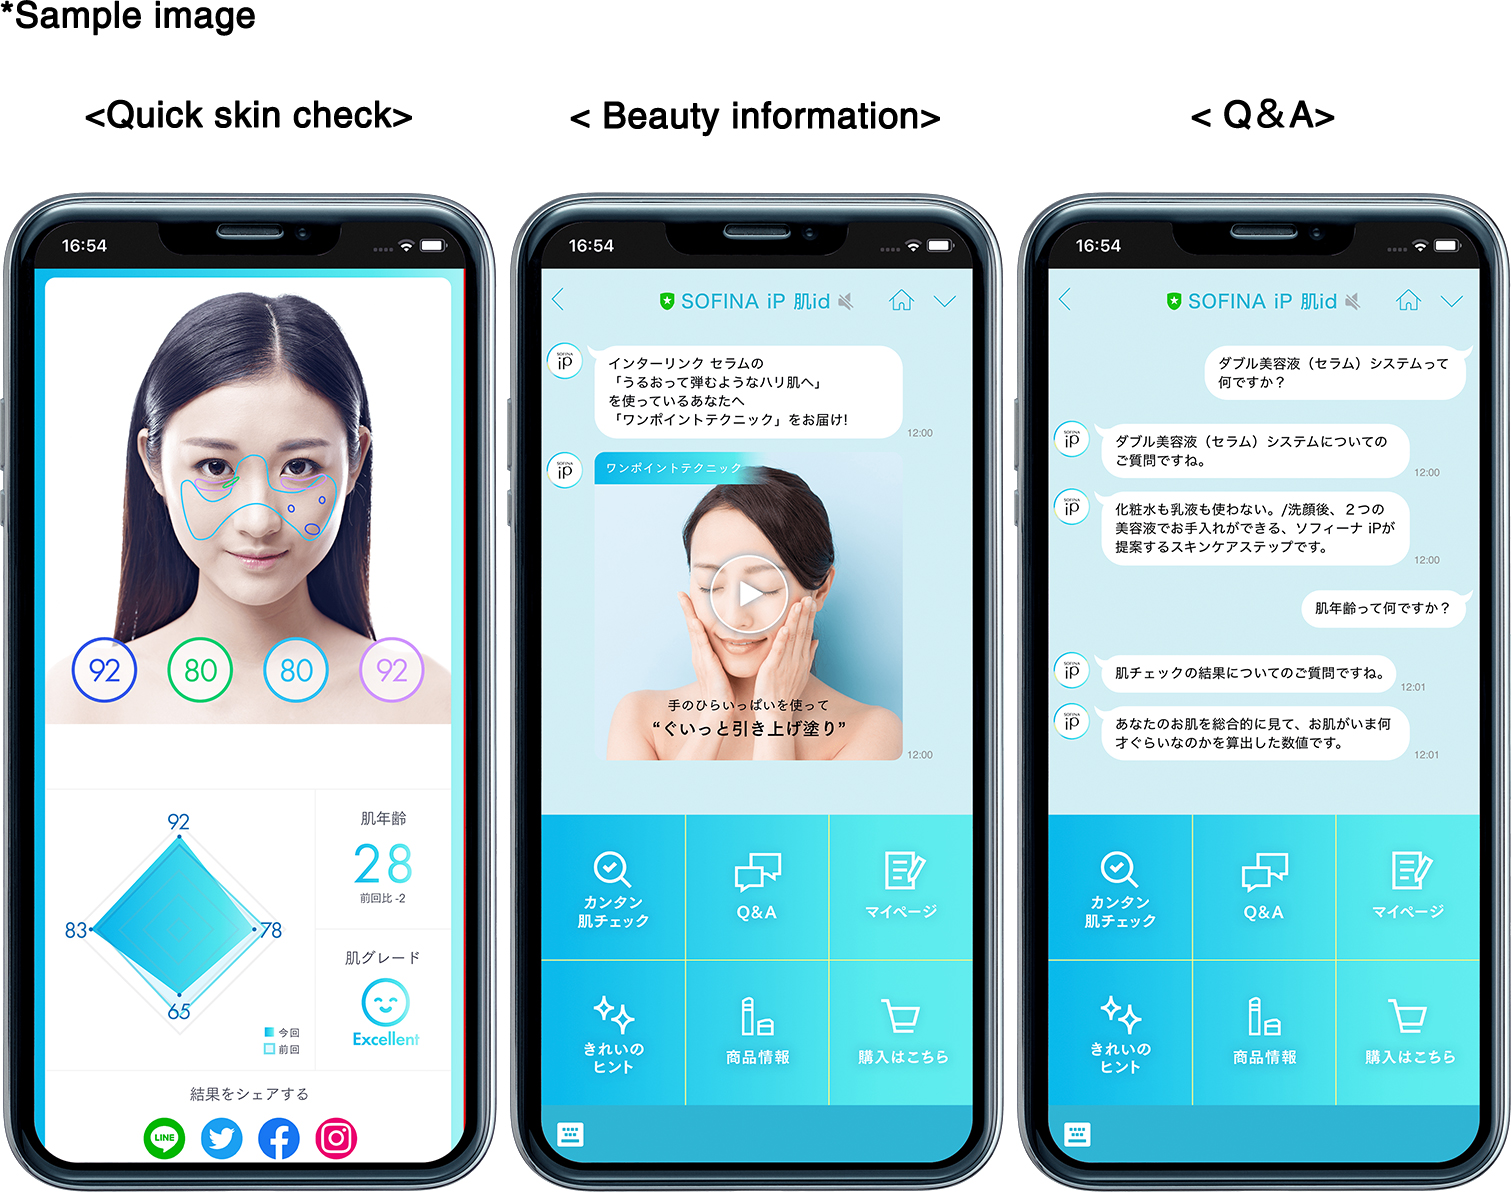 Kao New Proposals For Effective Efficient Skincare Sofina Ip Launches Double Serum System And A Digital Service For Ai Based 24 7 Beauty Advice